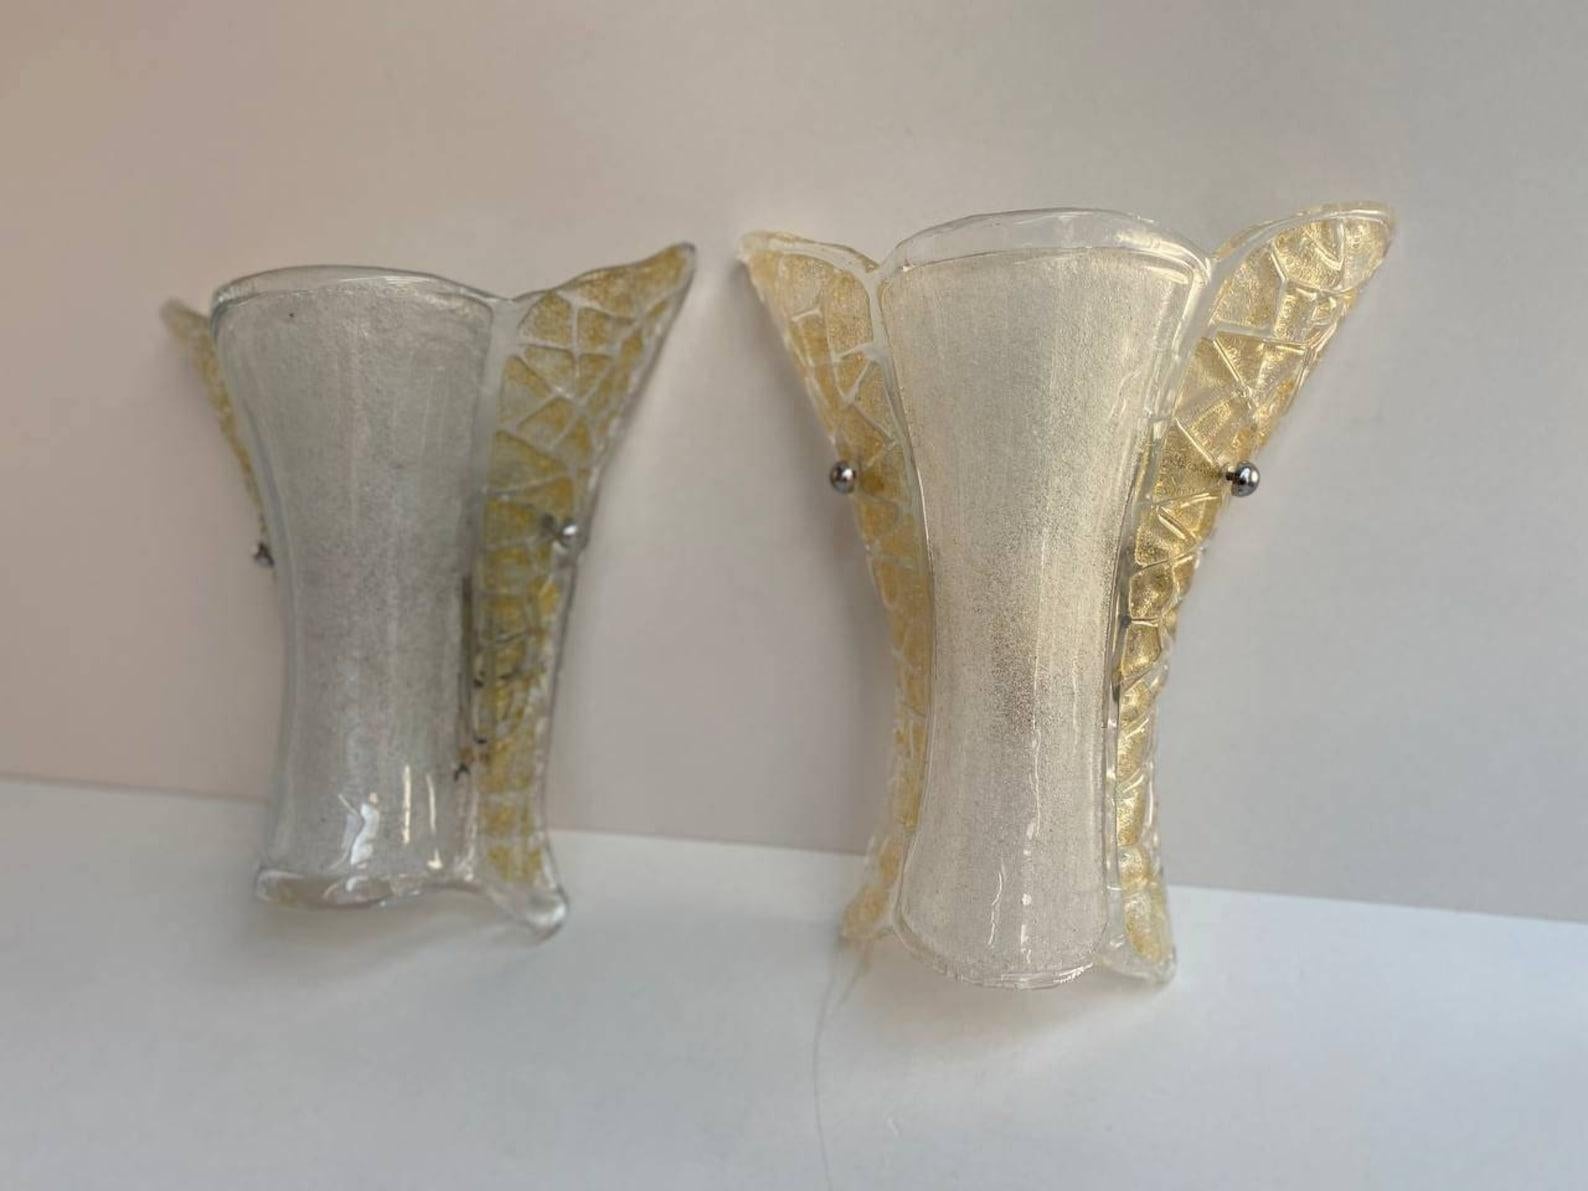 Vintage Murano Glass Set of Wall Sconces by Venini, 1970s For Sale 1